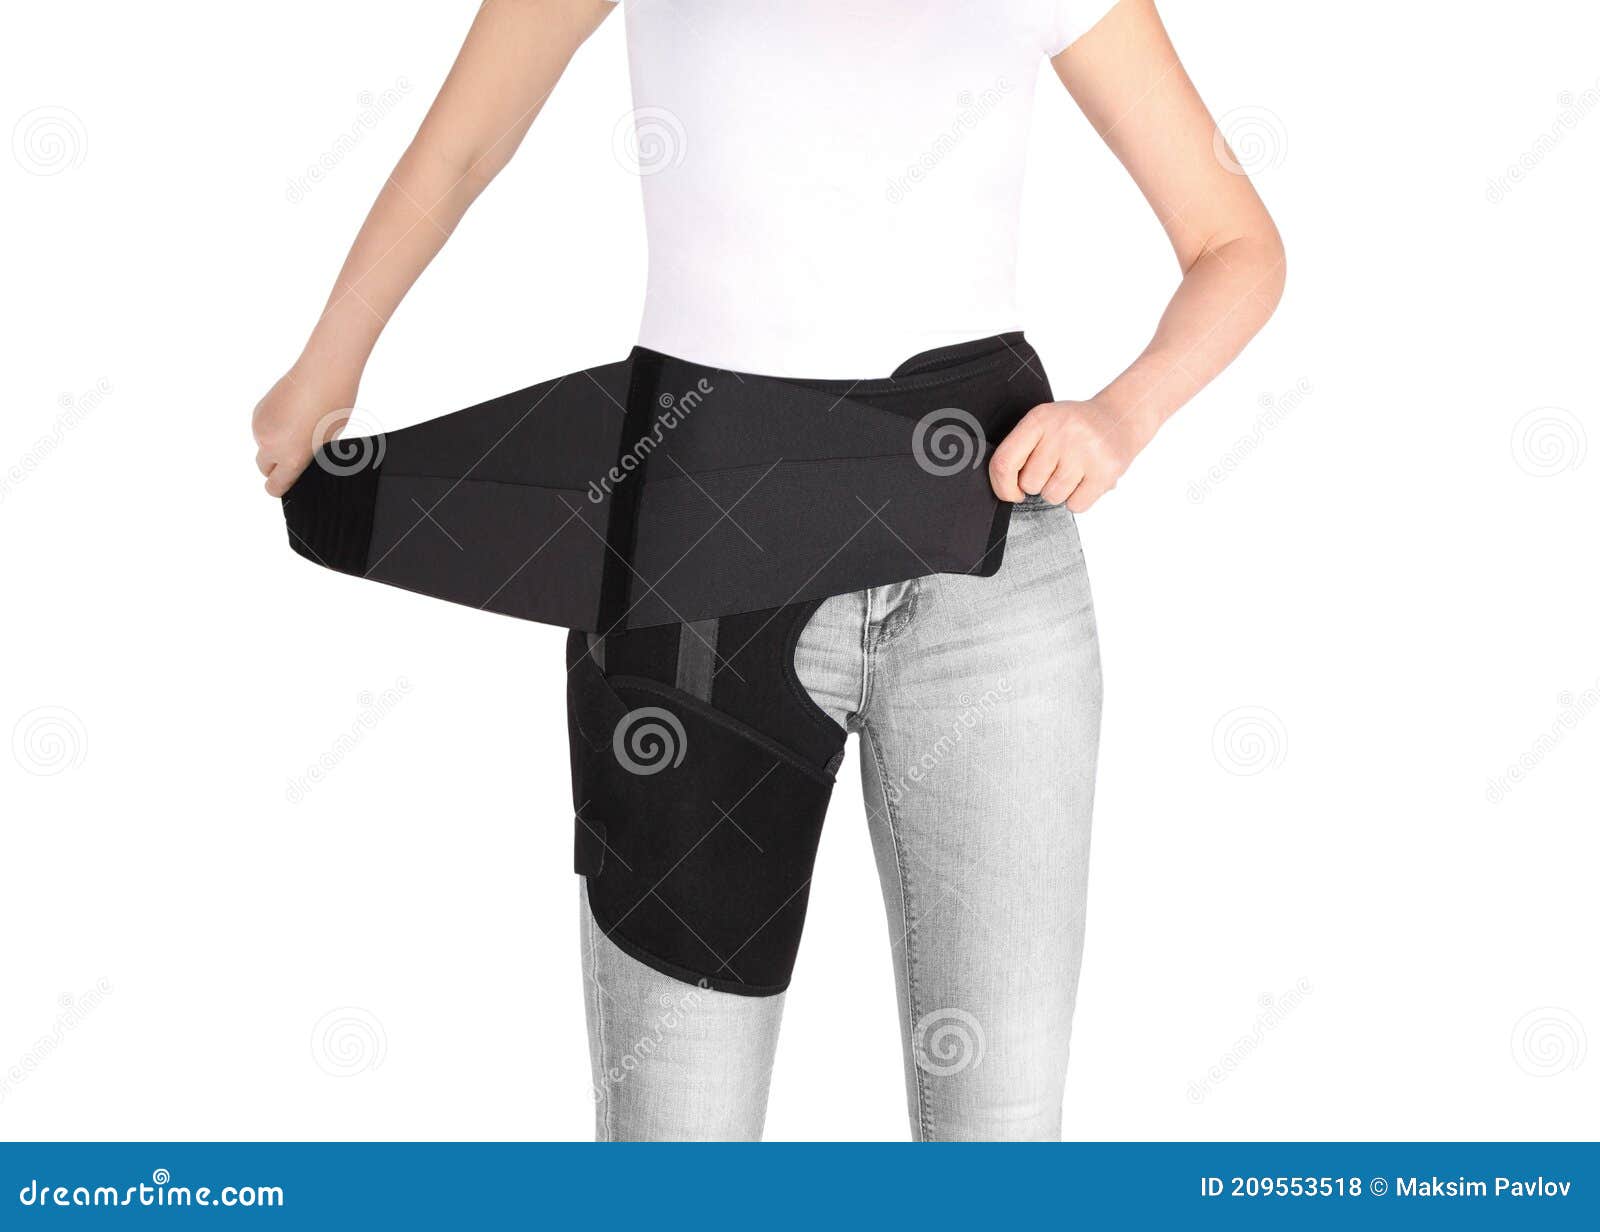 Hip Support Brace. Bandage Protector on the Hip Joint. Medical